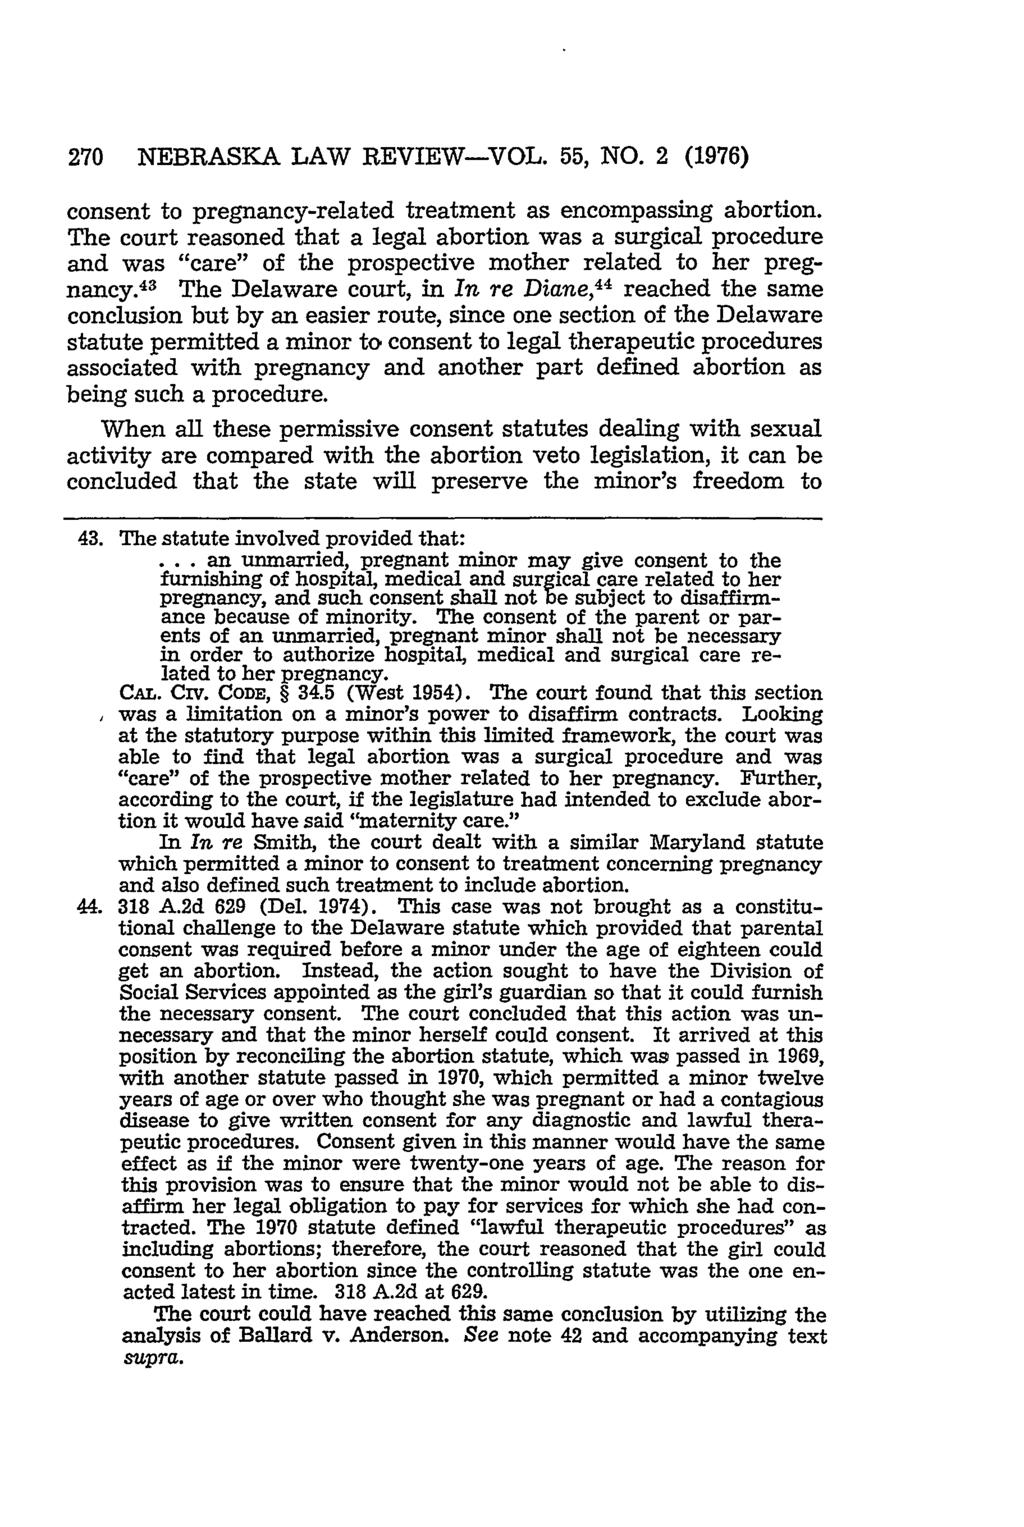 270 NEBRASKA LAW REVIEW-VOL. 55, NO. 2 (1976) consent to pregnancy-related treatment as encompassing abortion.